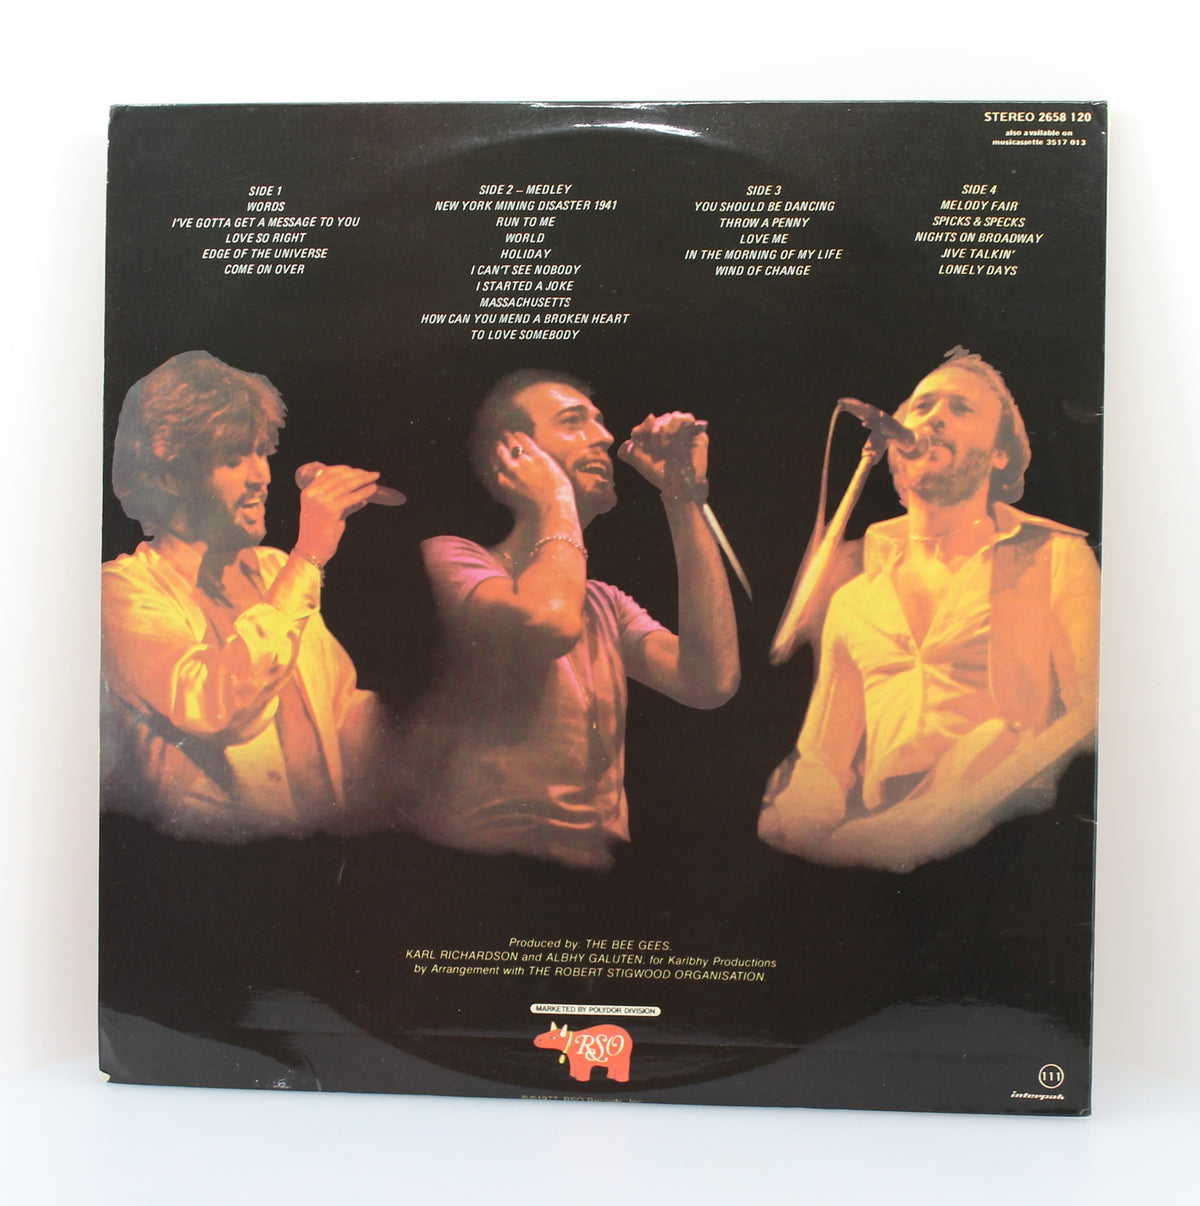 Bee Gees - Live, Vinyl LP 33Rpm, South Africa 1977